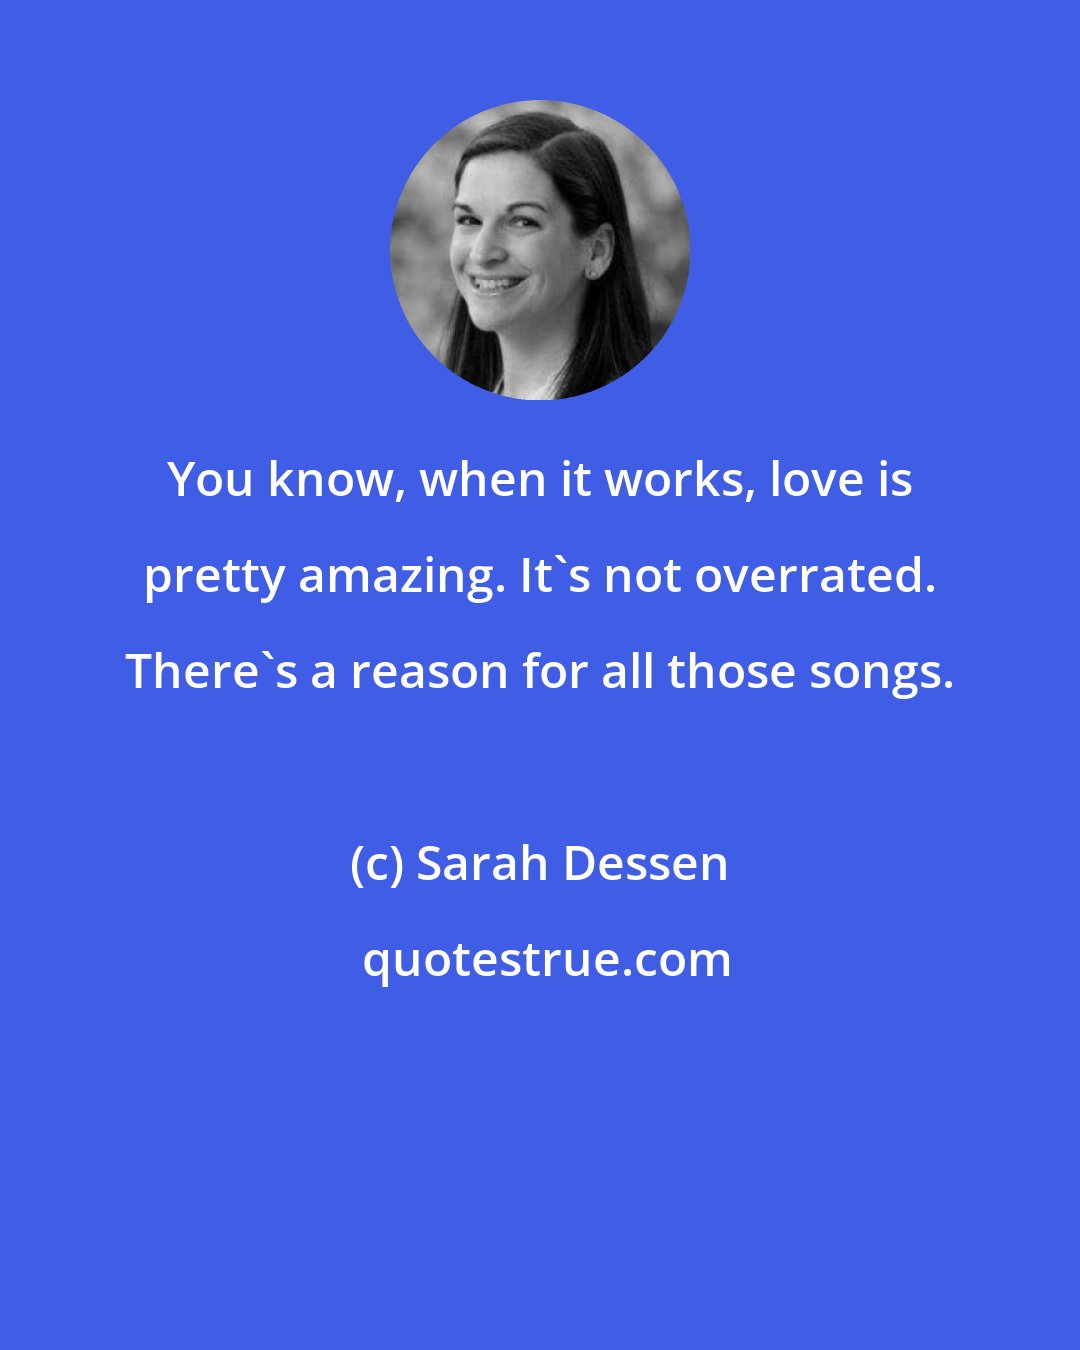 Sarah Dessen: You know, when it works, love is pretty amazing. It's not overrated. There's a reason for all those songs.